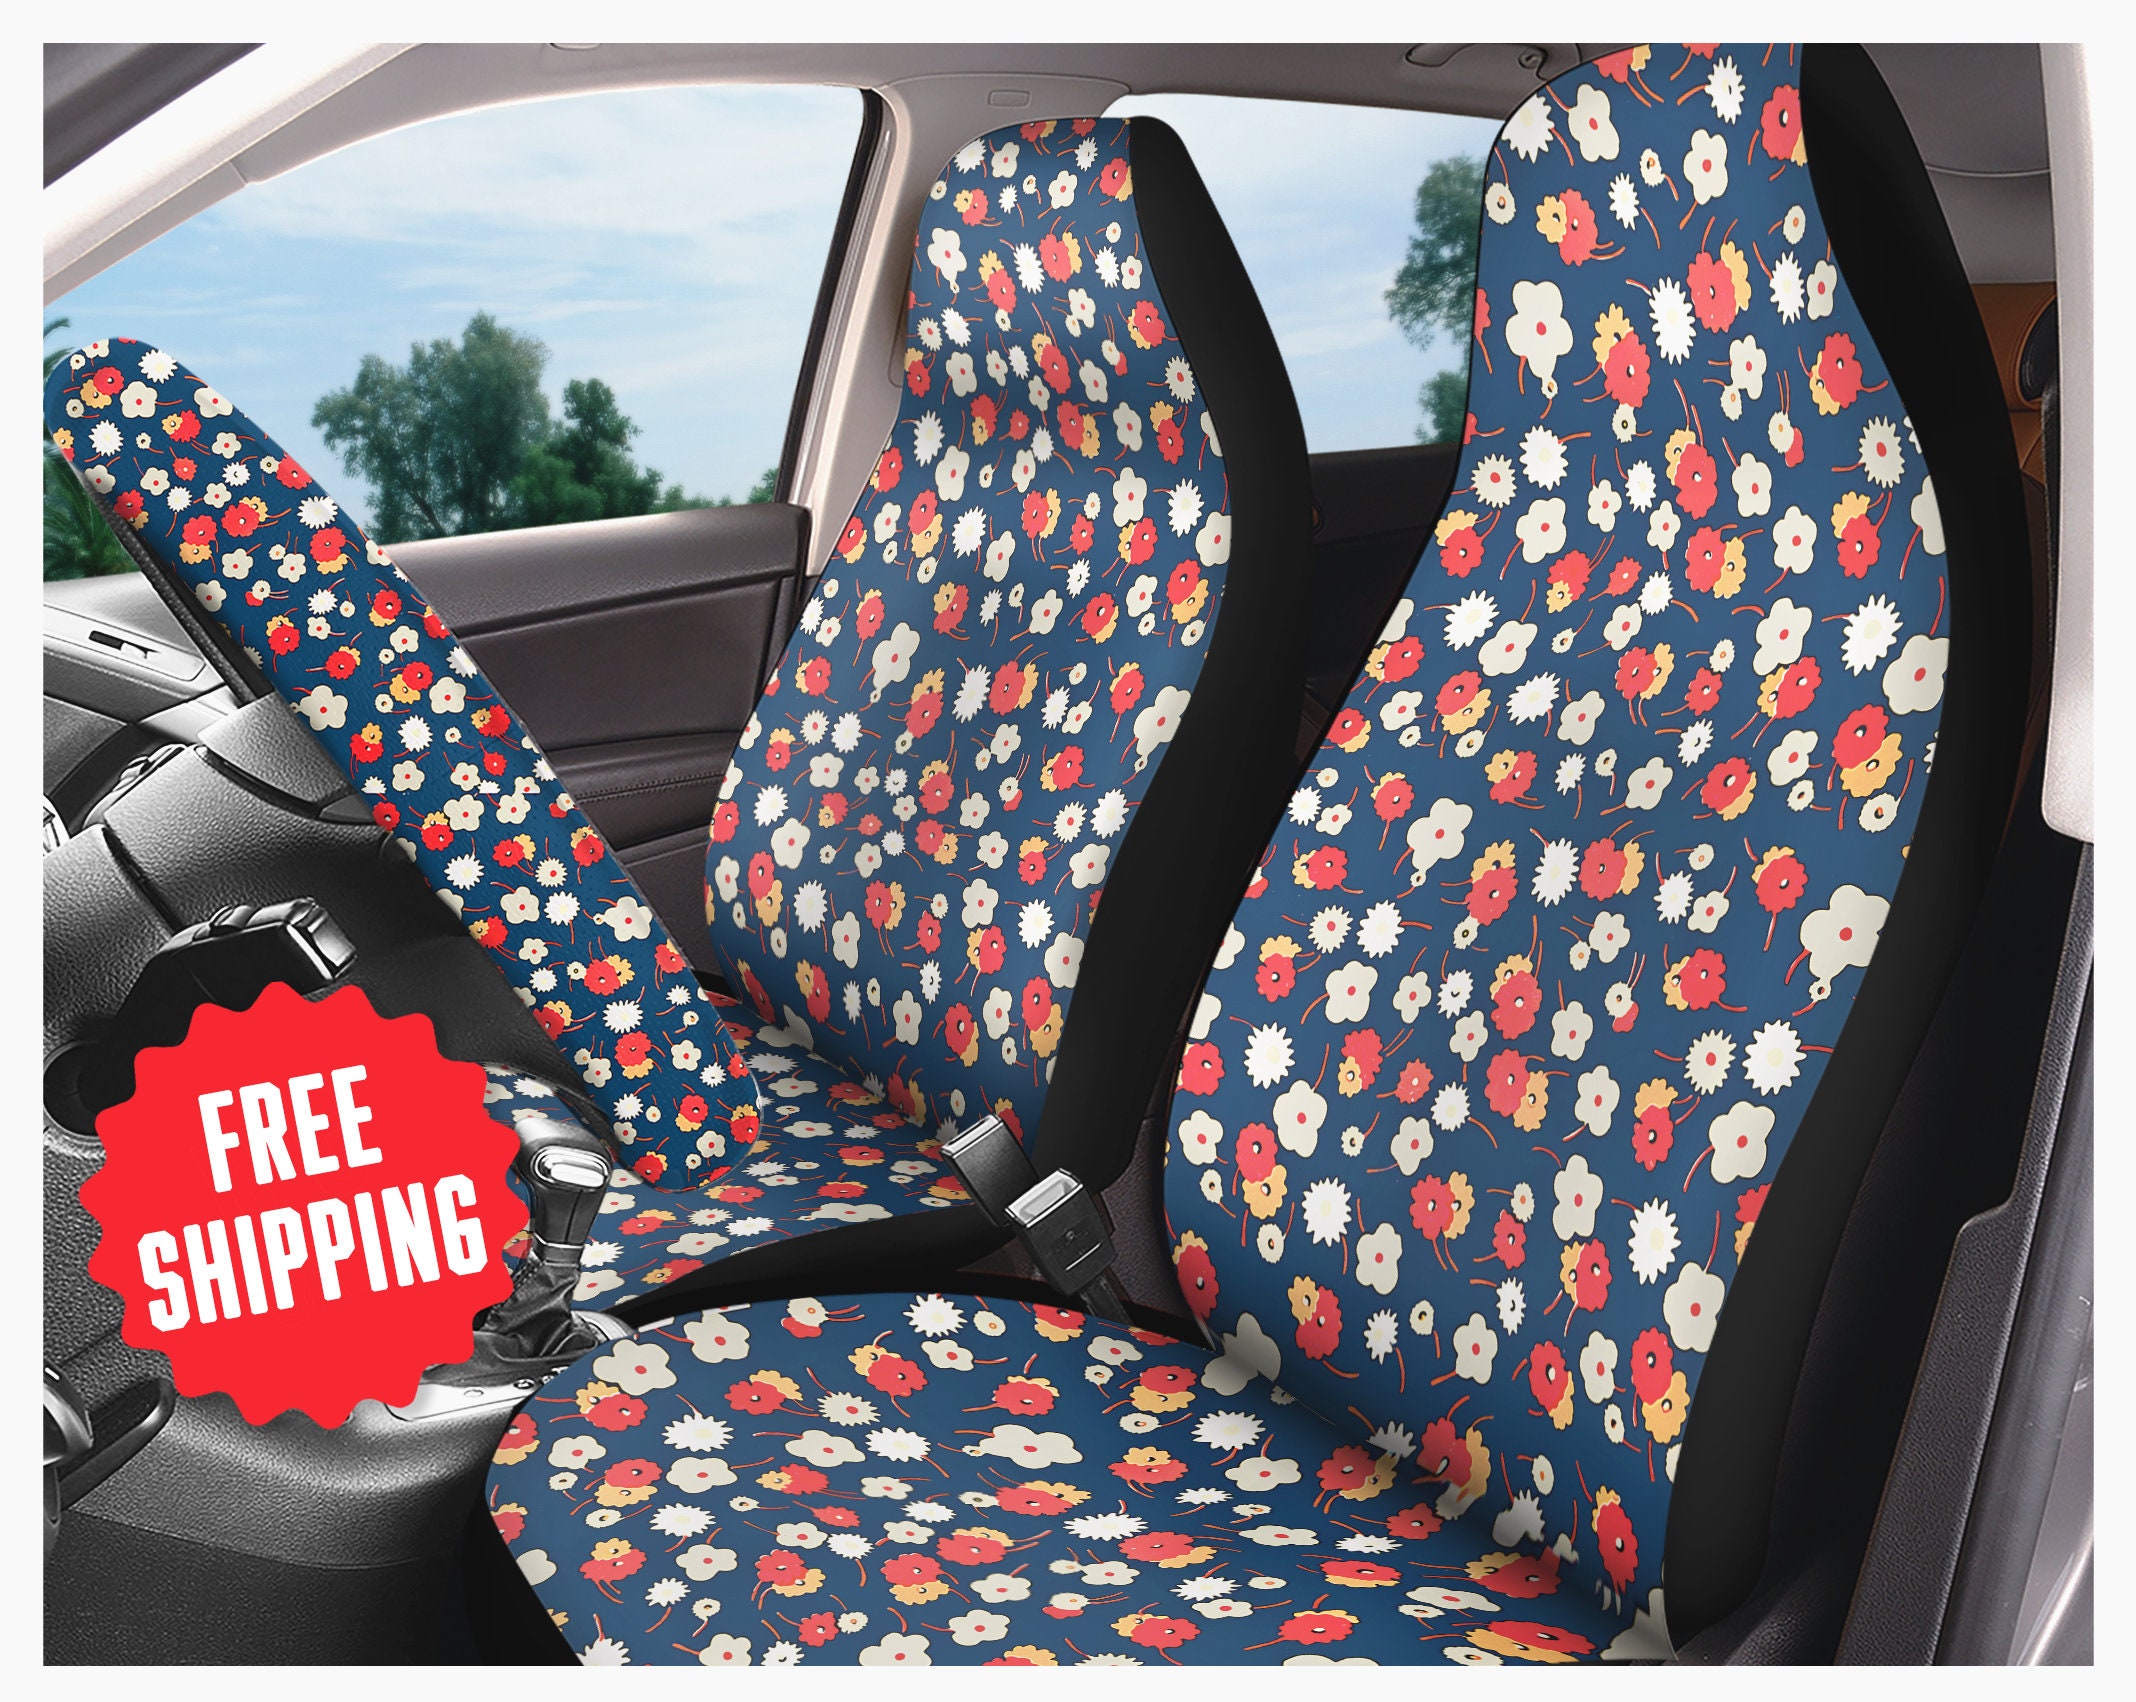 Blue Car Seat Covers Nature Inspired Abstract Car Decor 